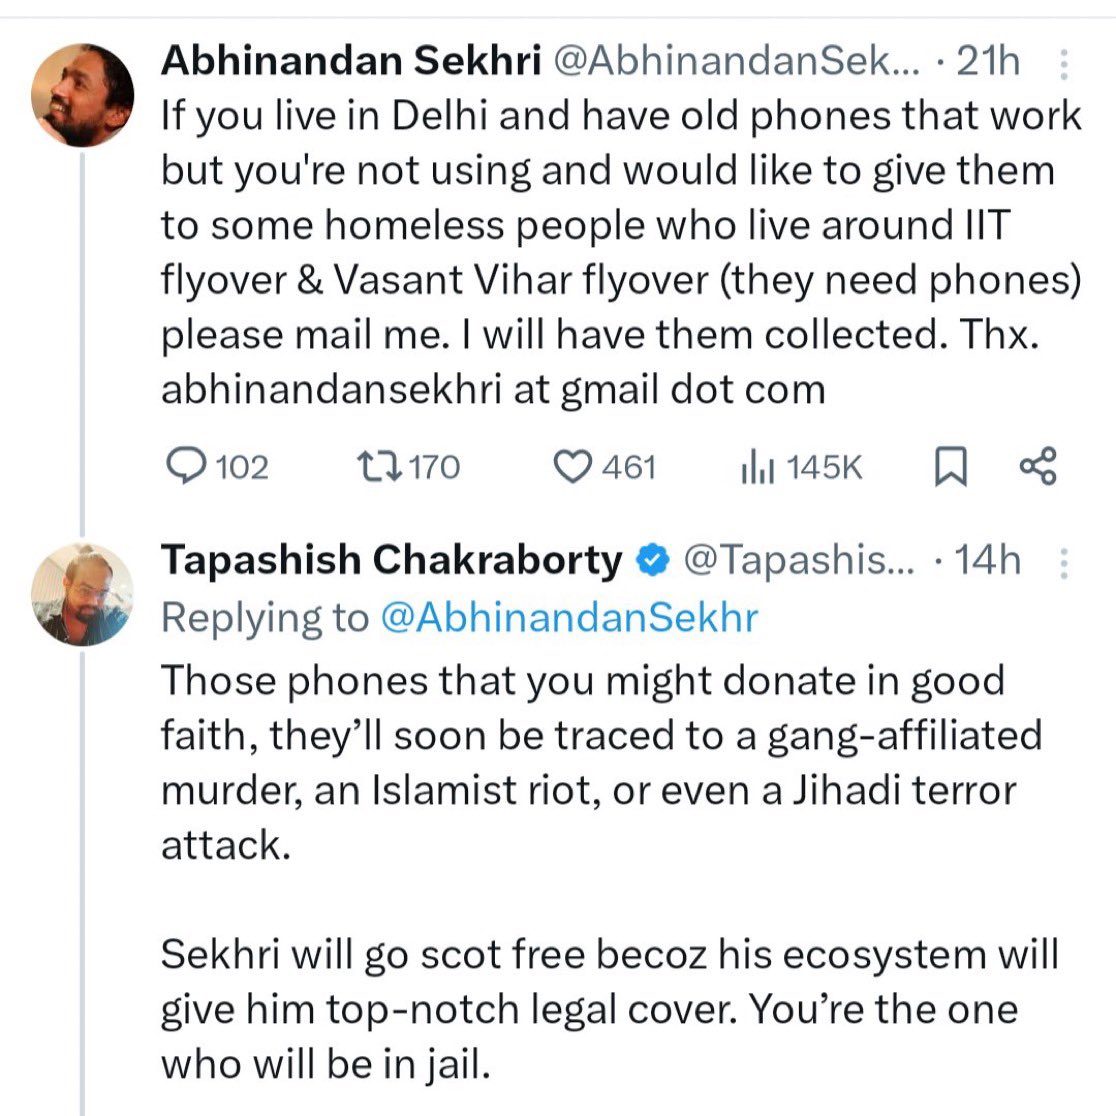 Never give your phone to an unknown!

Likes of @AbhinandanSekhr may misuse it and you’ll rot in jail for a crime you’ve not done.